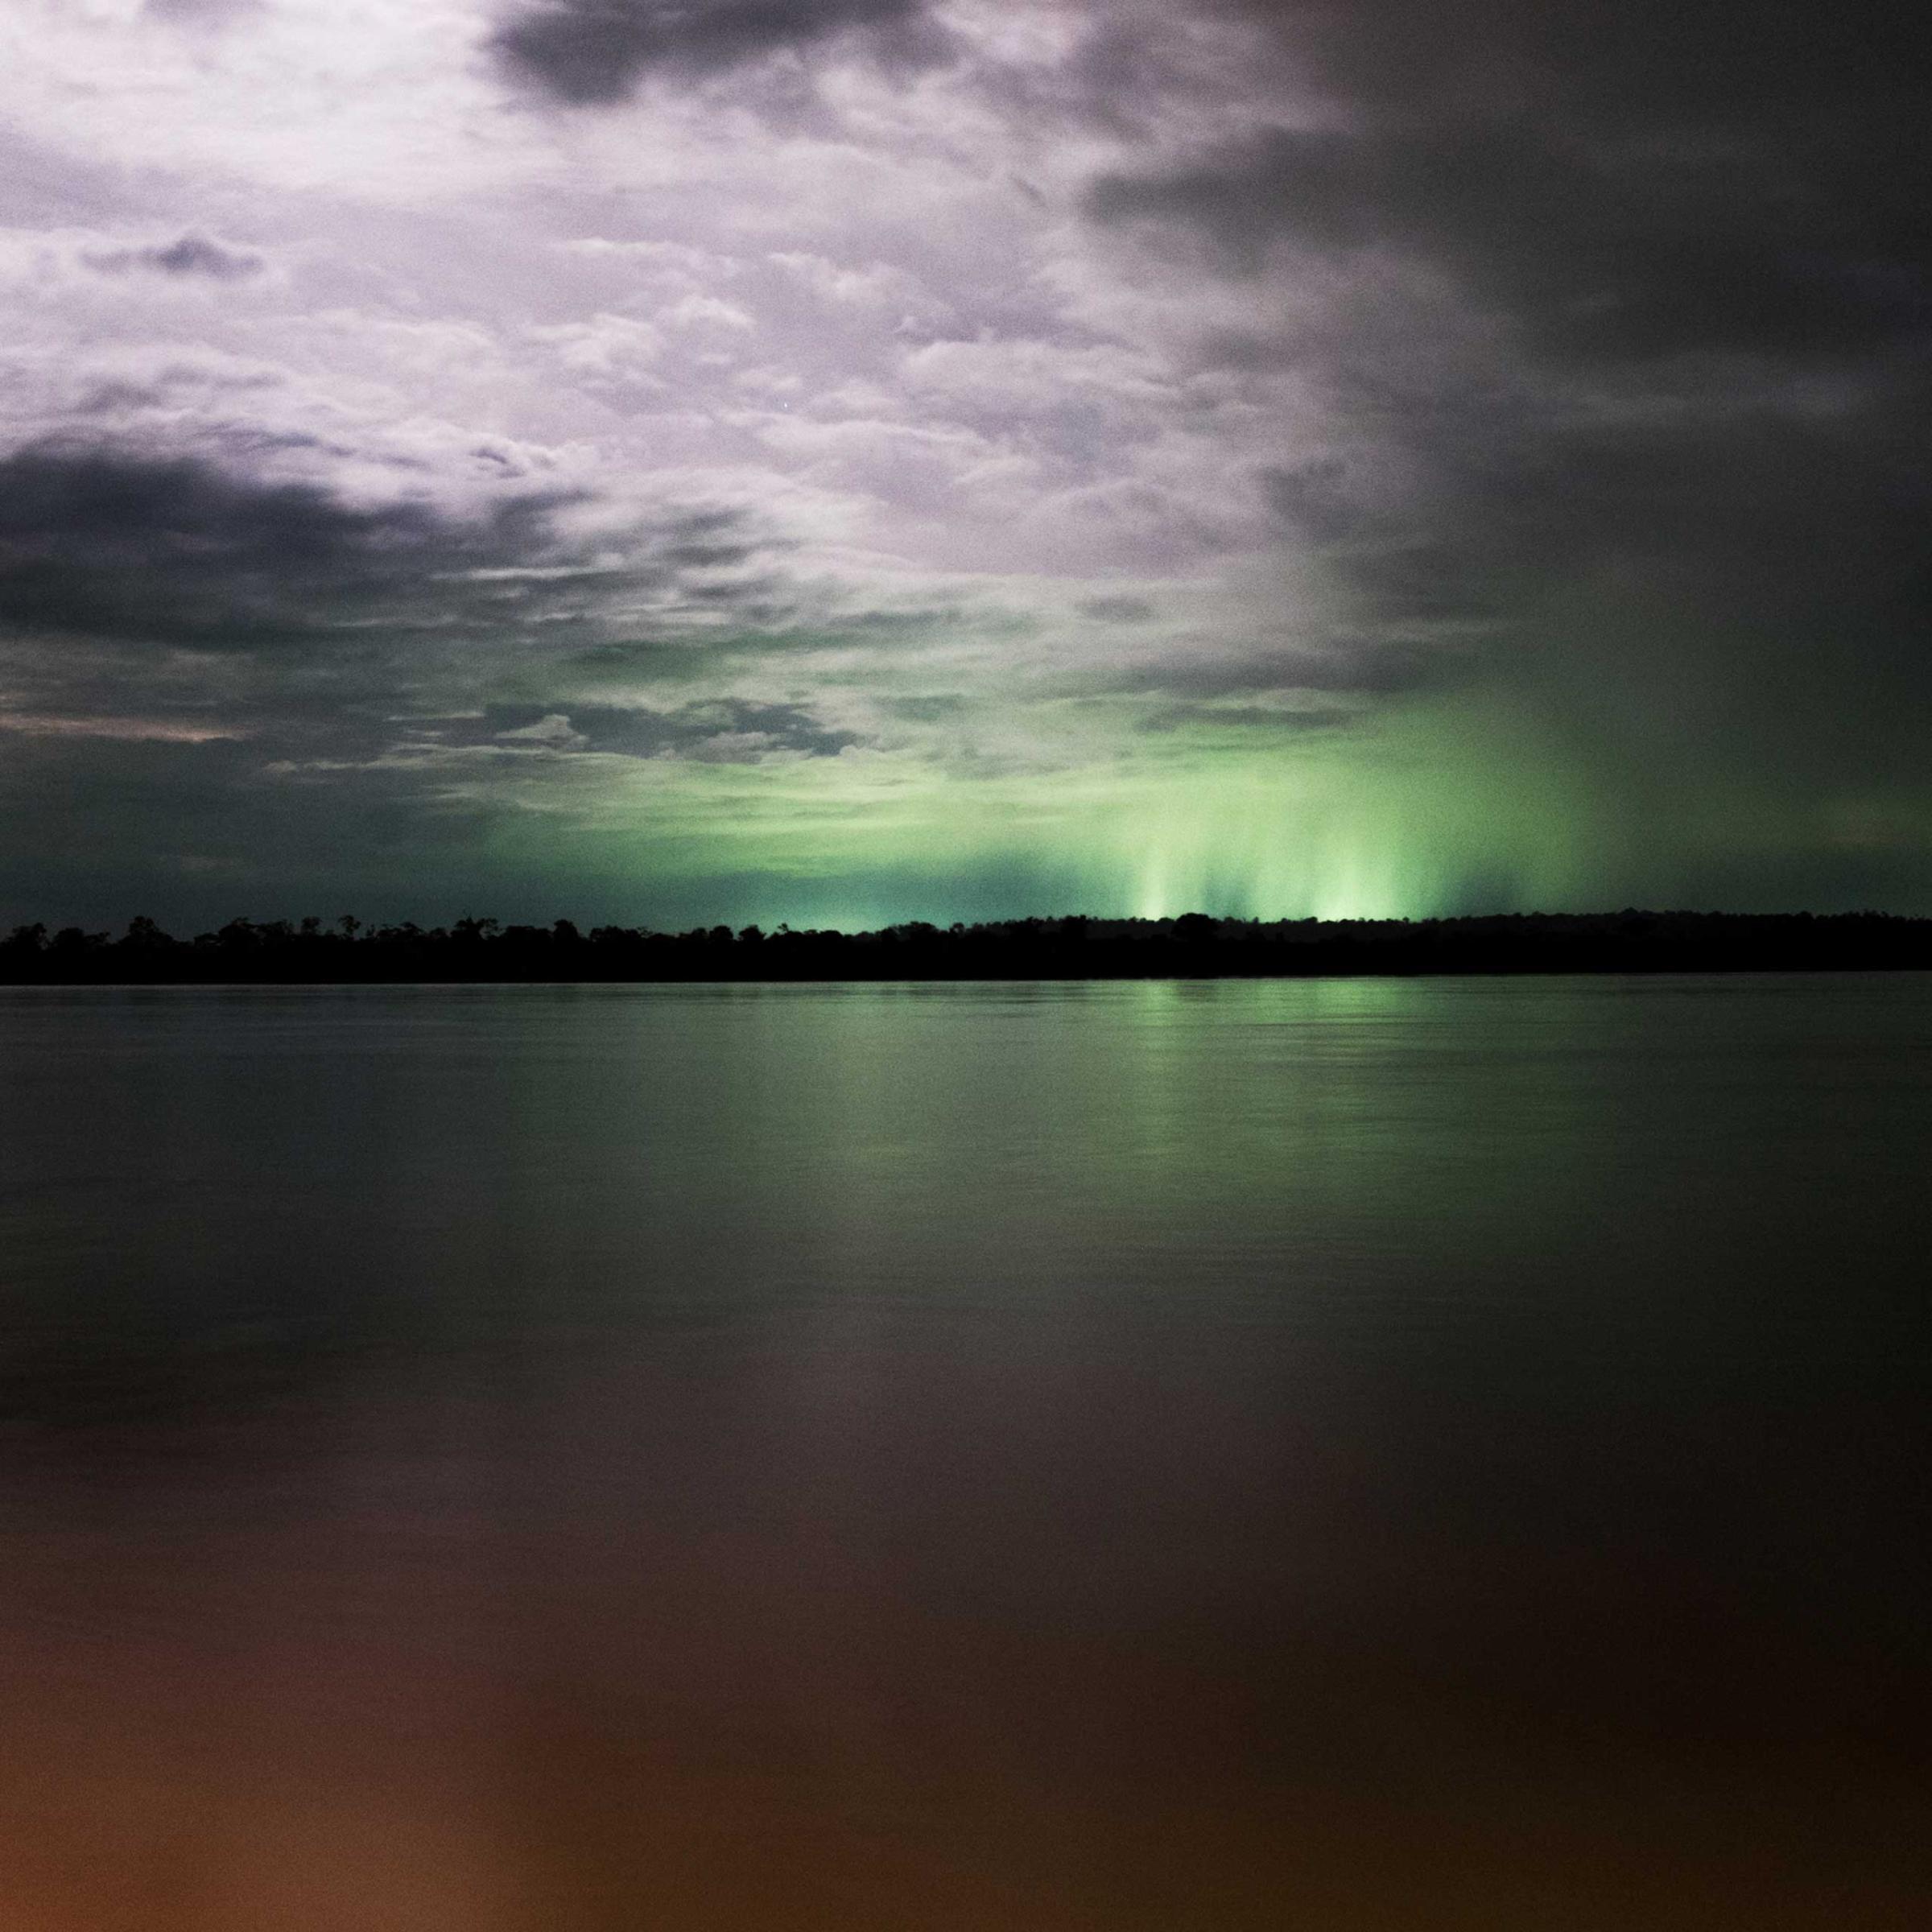 The construction site of the Belo Monte Dam lights up the sky over the Xingu River, seen from the nearby city of Altamira. Belo Monte is the largest industrial operation in South America and will be the third largest dam in the world.